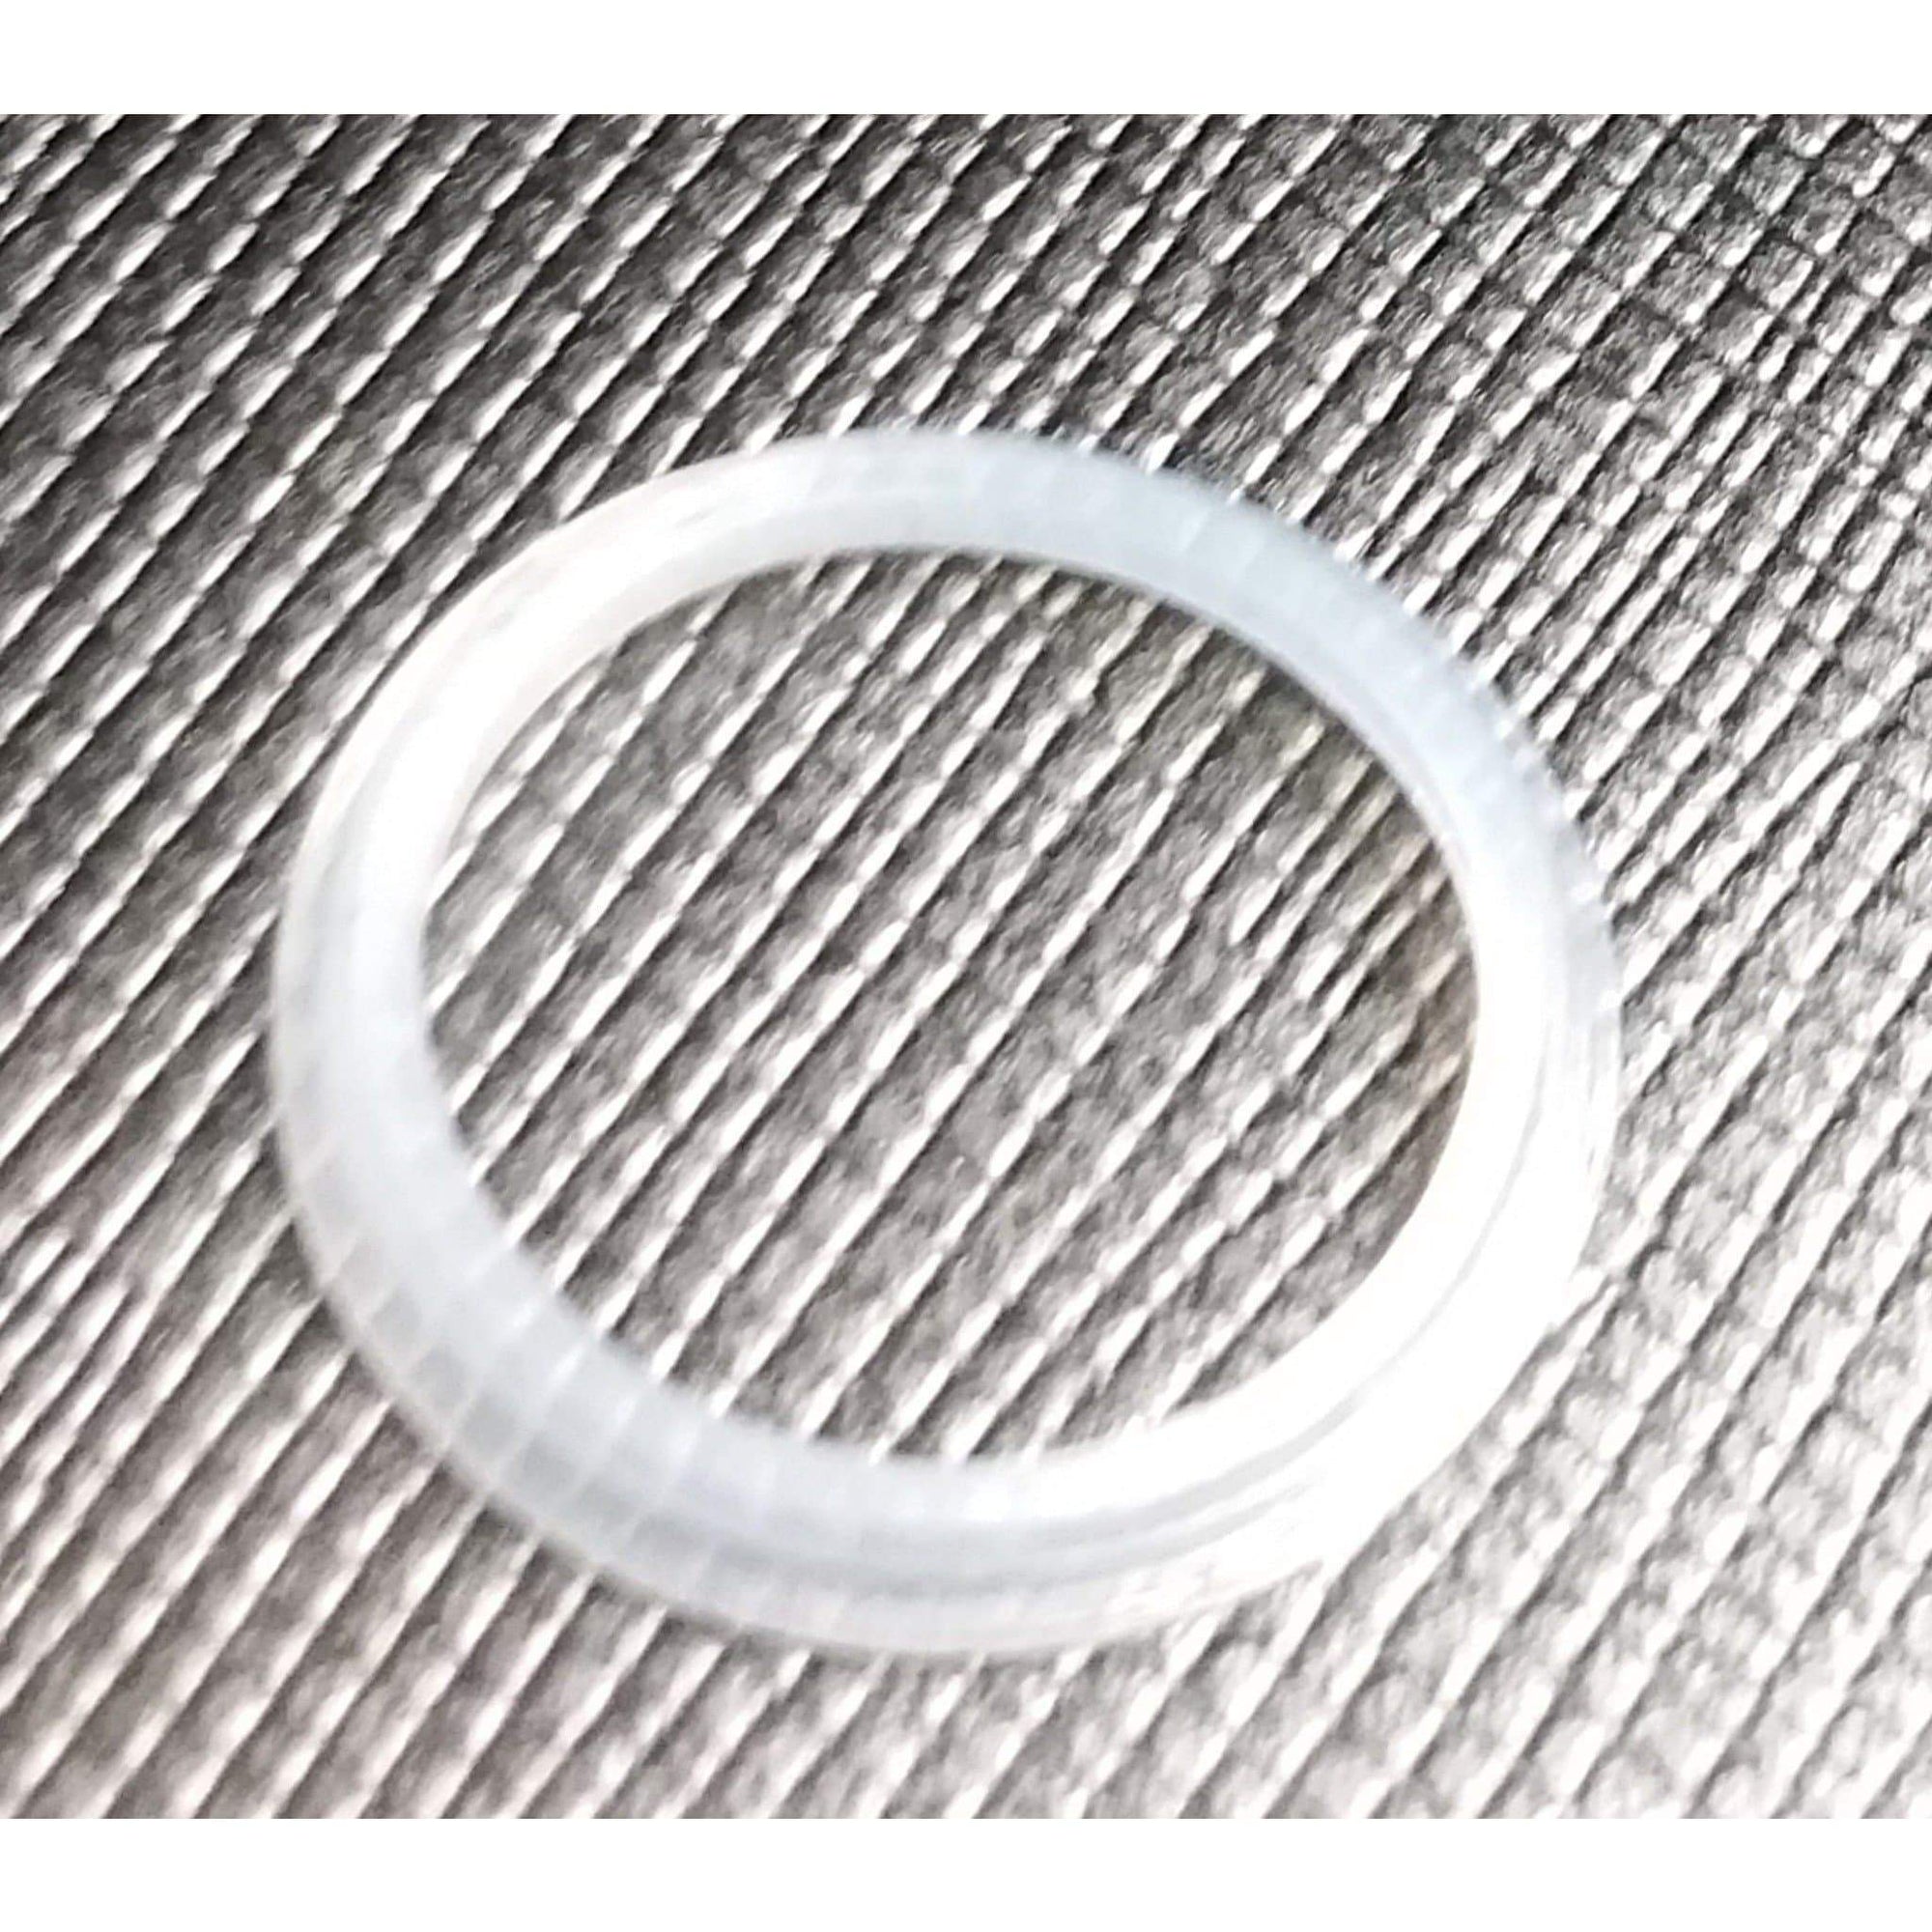 TFV4 Nano Replacement Seals TOP White Disc Seal Seals/Oring's